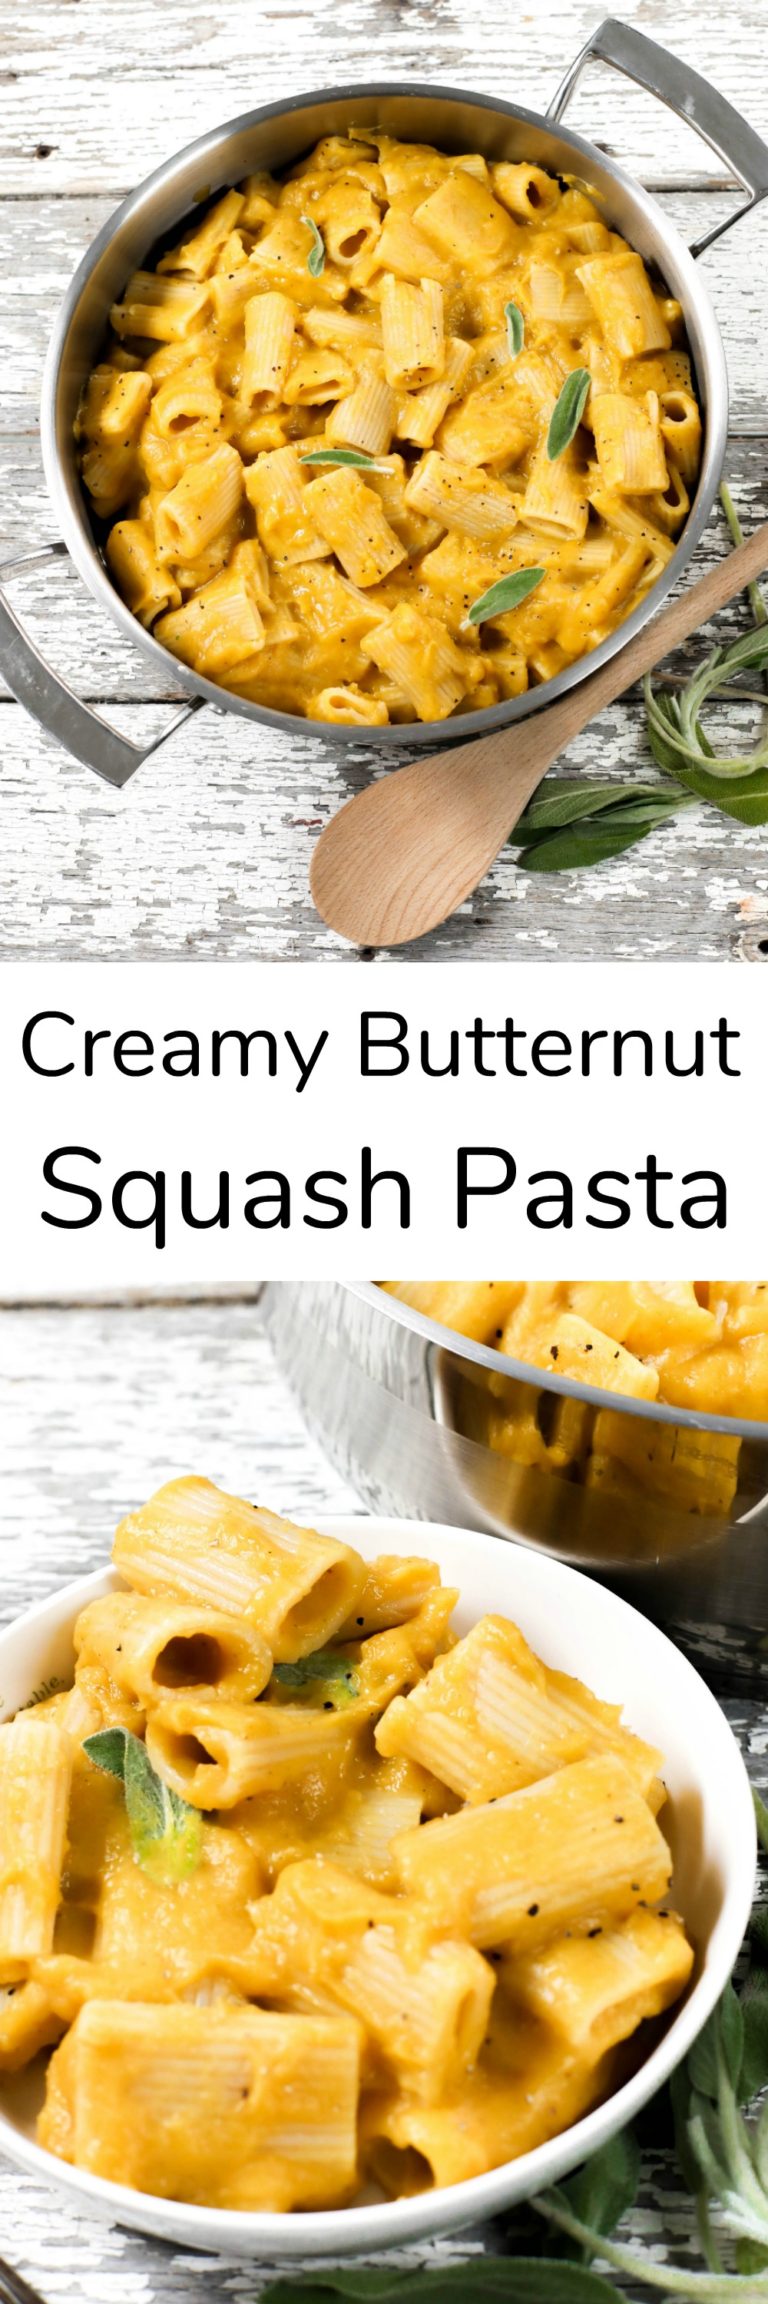 Creamy Butternut Squash Pasta - Life With Ayla Rianne